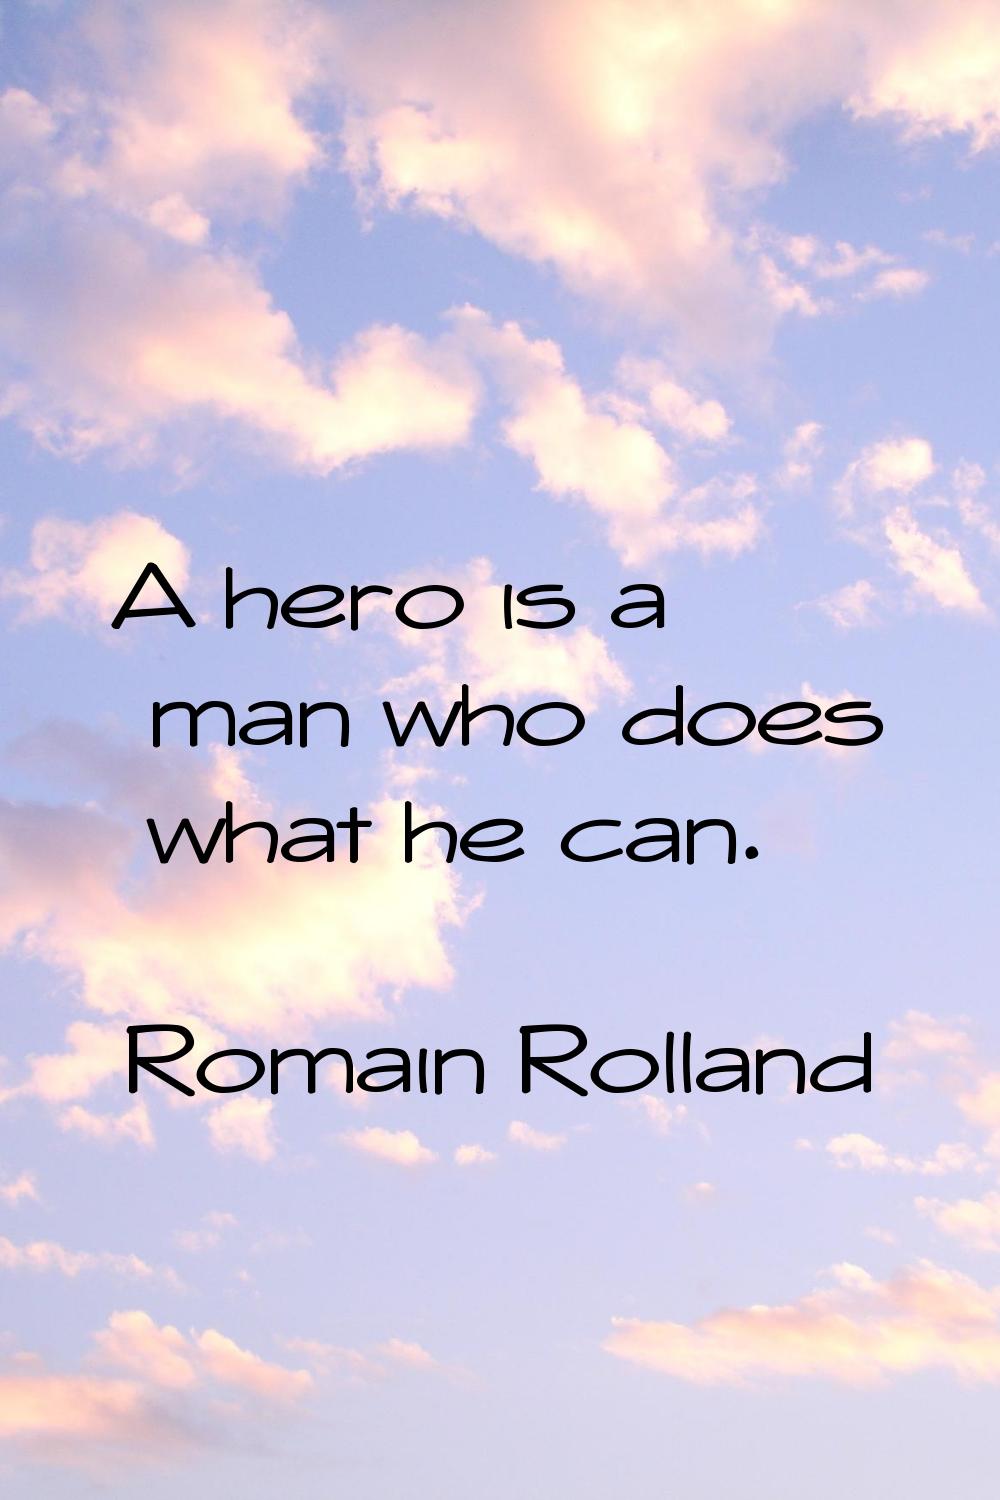 A hero is a man who does what he can.